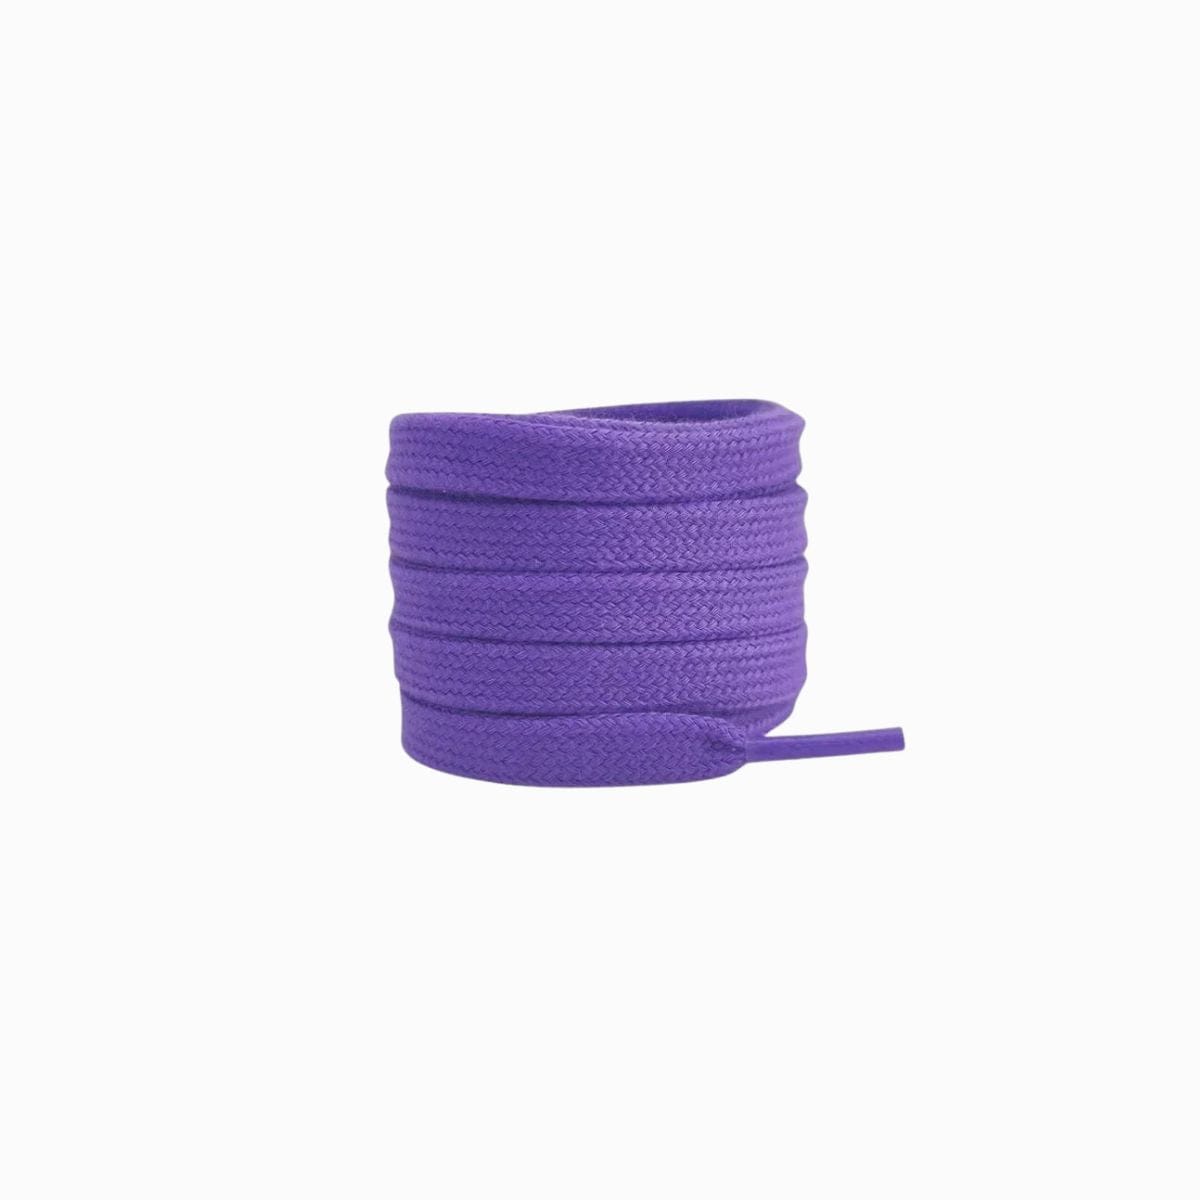 Purple Replacement Adidas Shoe Laces for Adidas Samba ADV Sneakers by Kicks Shoelaces